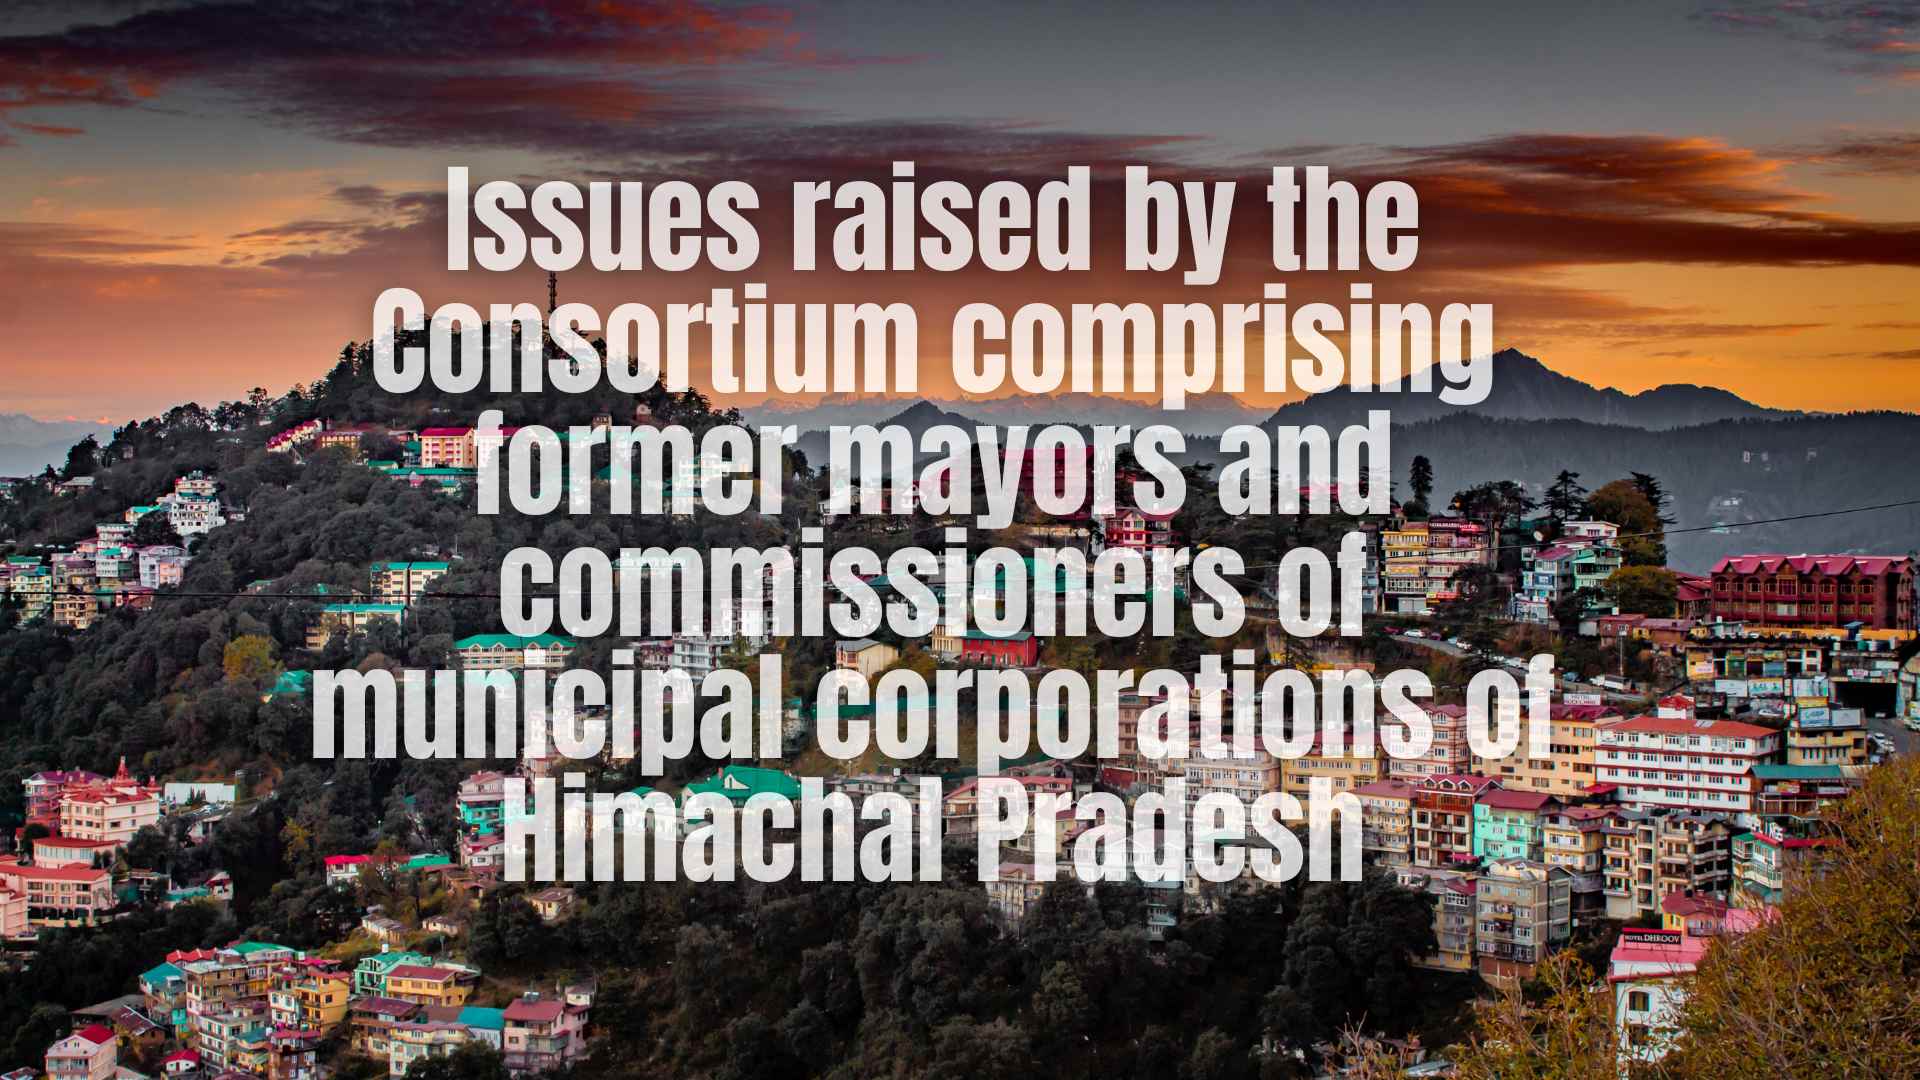 Issues raised by the Consortium comprising former mayors and commissioners of municipal corporations of Himachal Pradesh